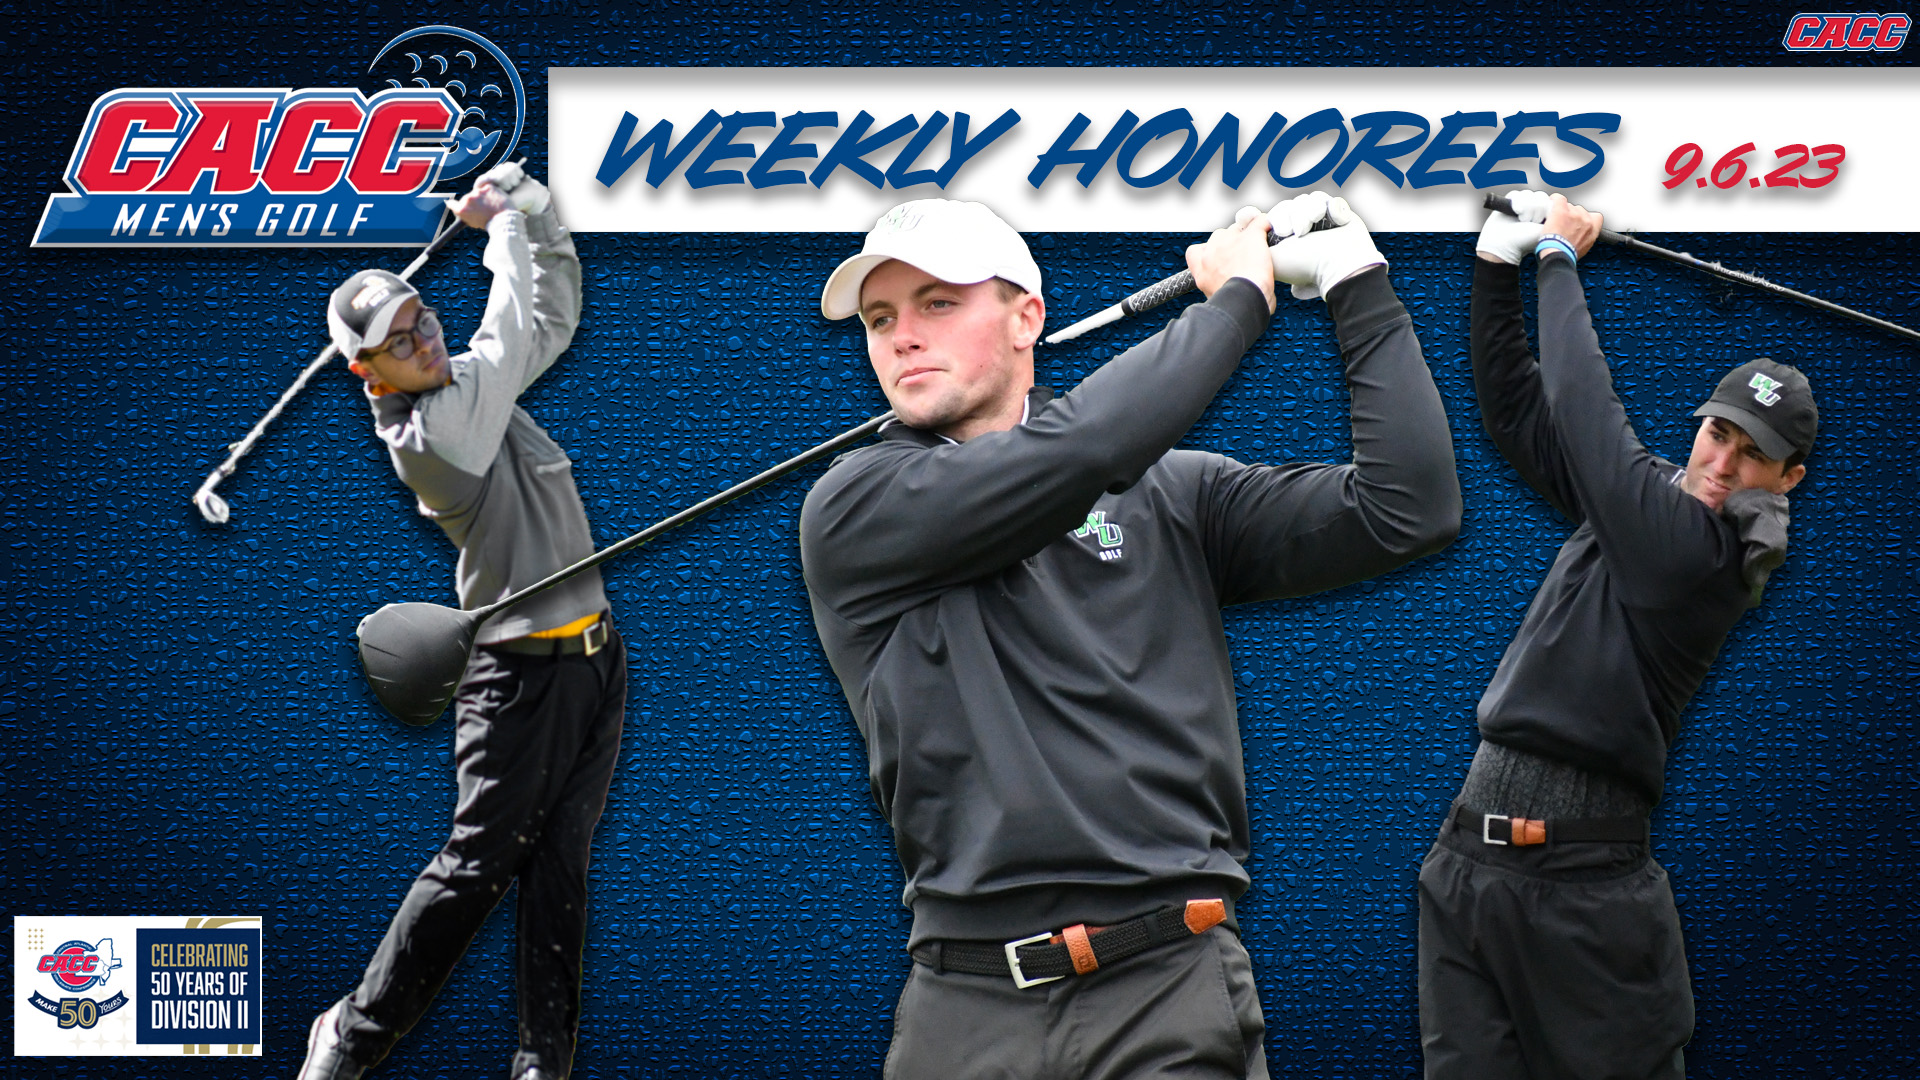 CACC Men's Golf Weekly Honorees (9-6-23)